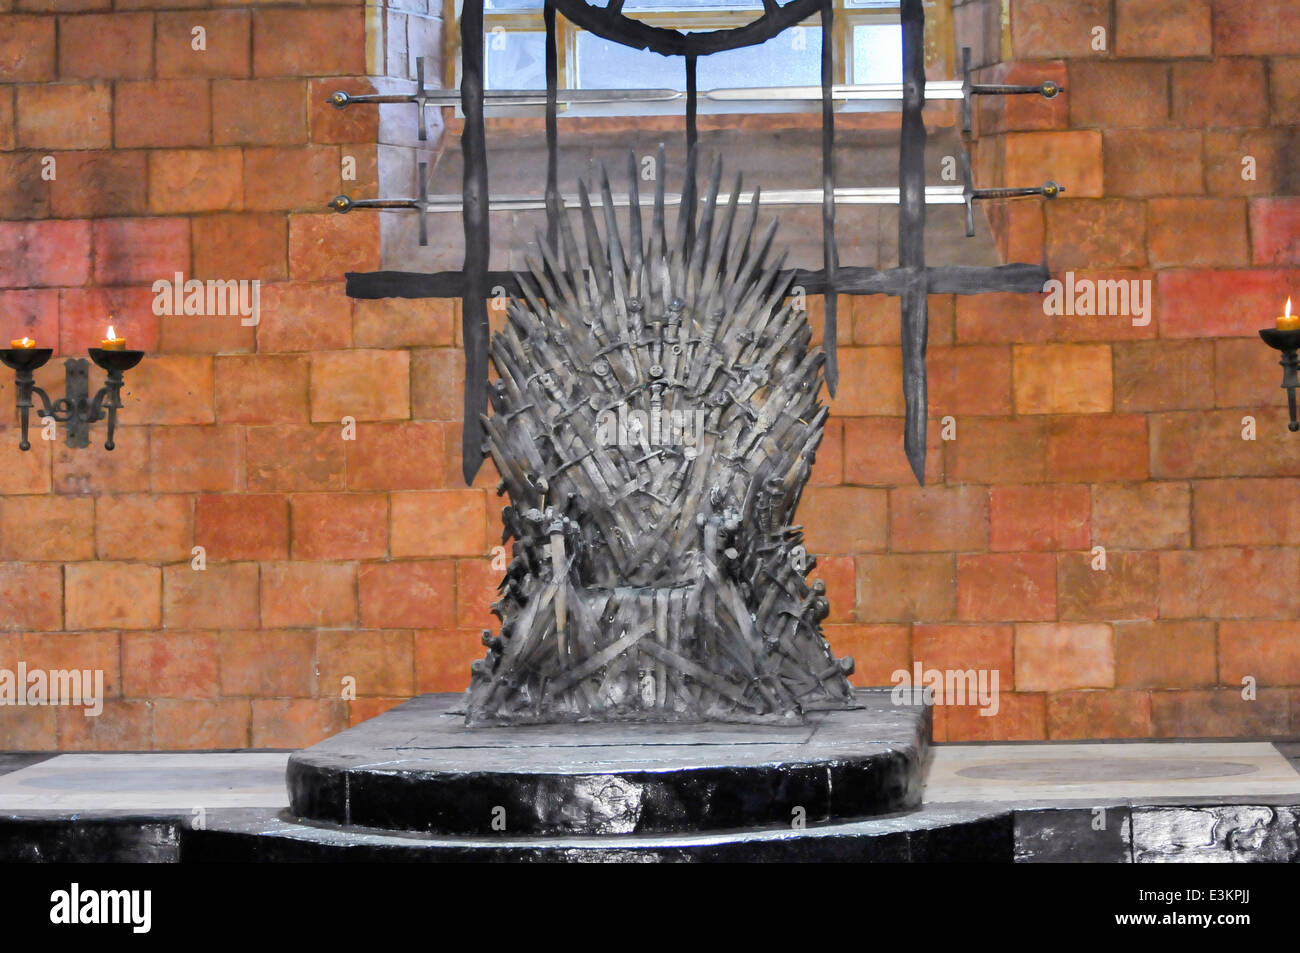 Iron Throne in the Throne Room of the Great Hall, King's Landing, Game of Thrones film set, Belfast Stock Photo